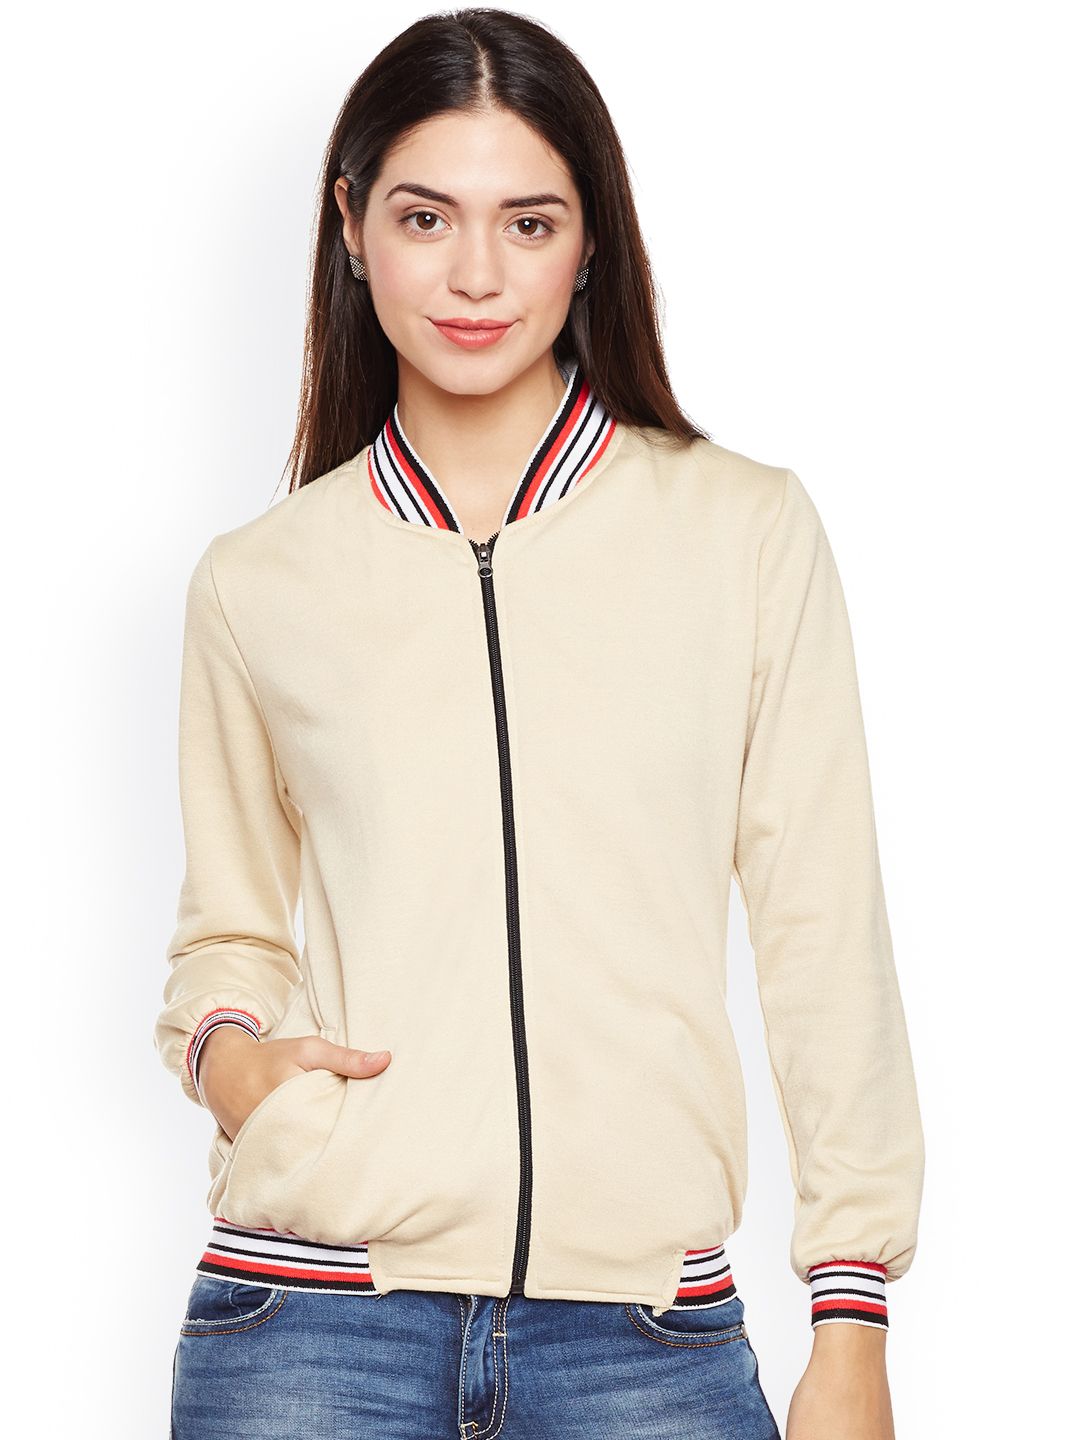 Belle Fille Women Nude-Coloured Solid Lightweight Bomber jacket Price in India